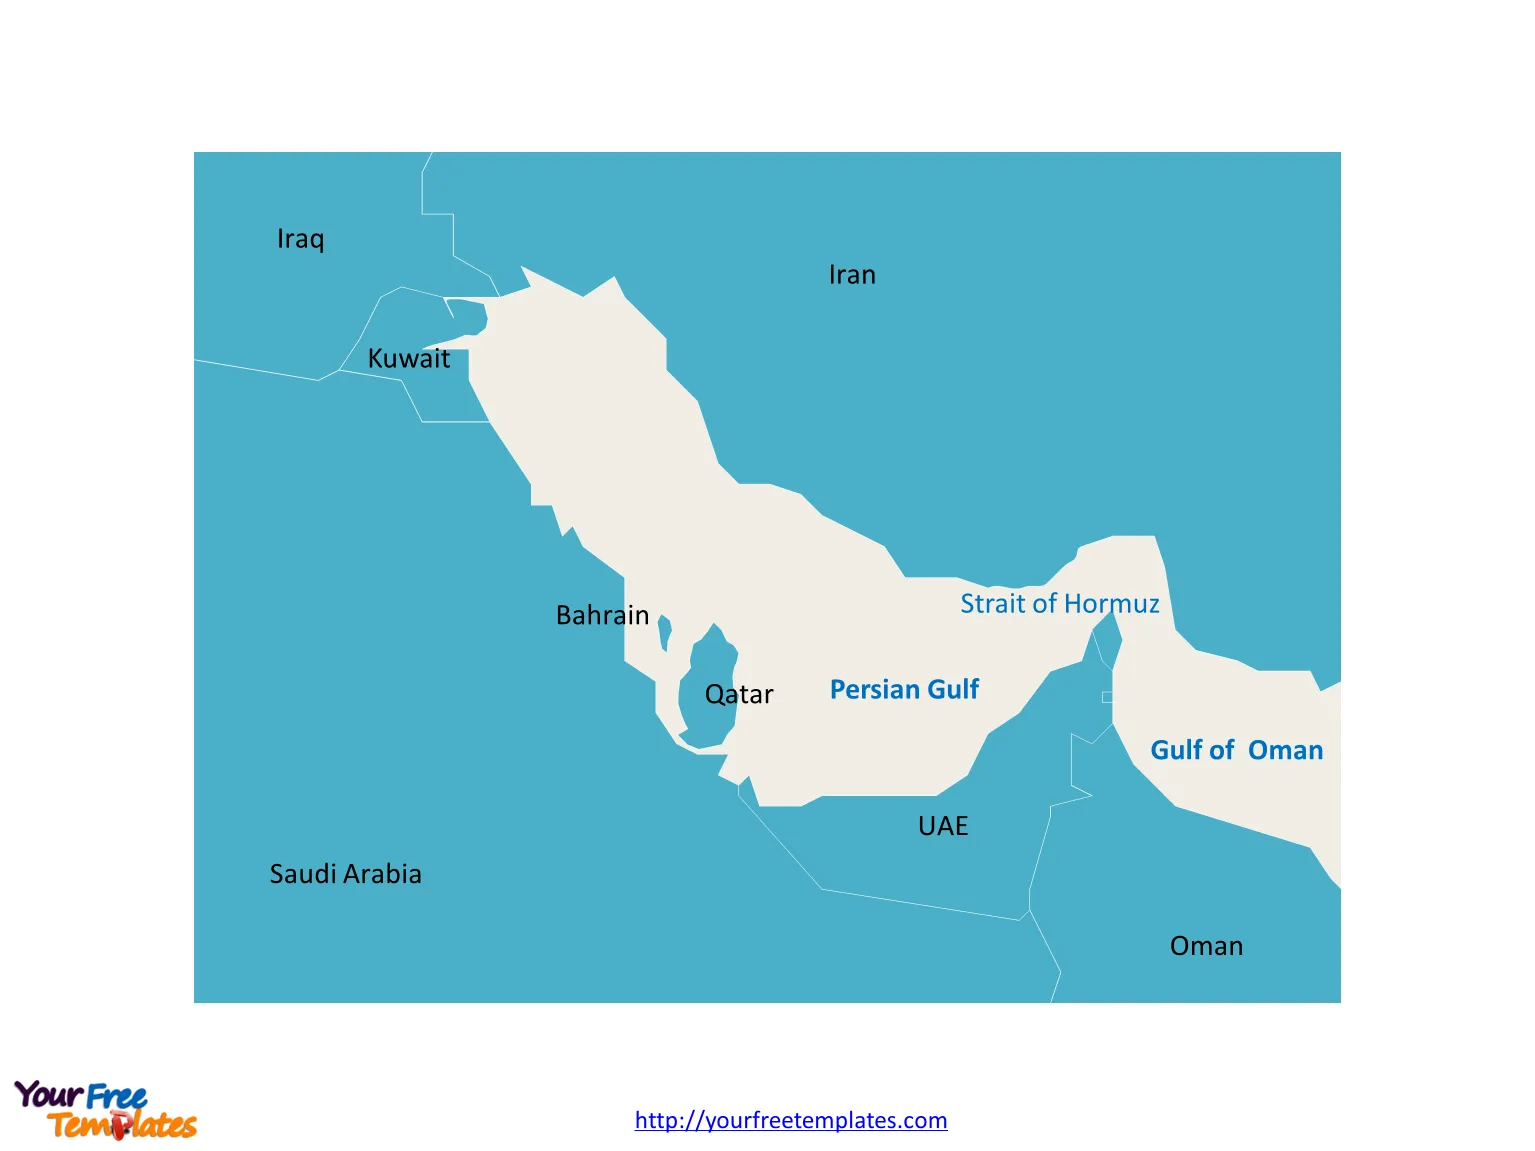 Strait of Hormuz map labeled with countries